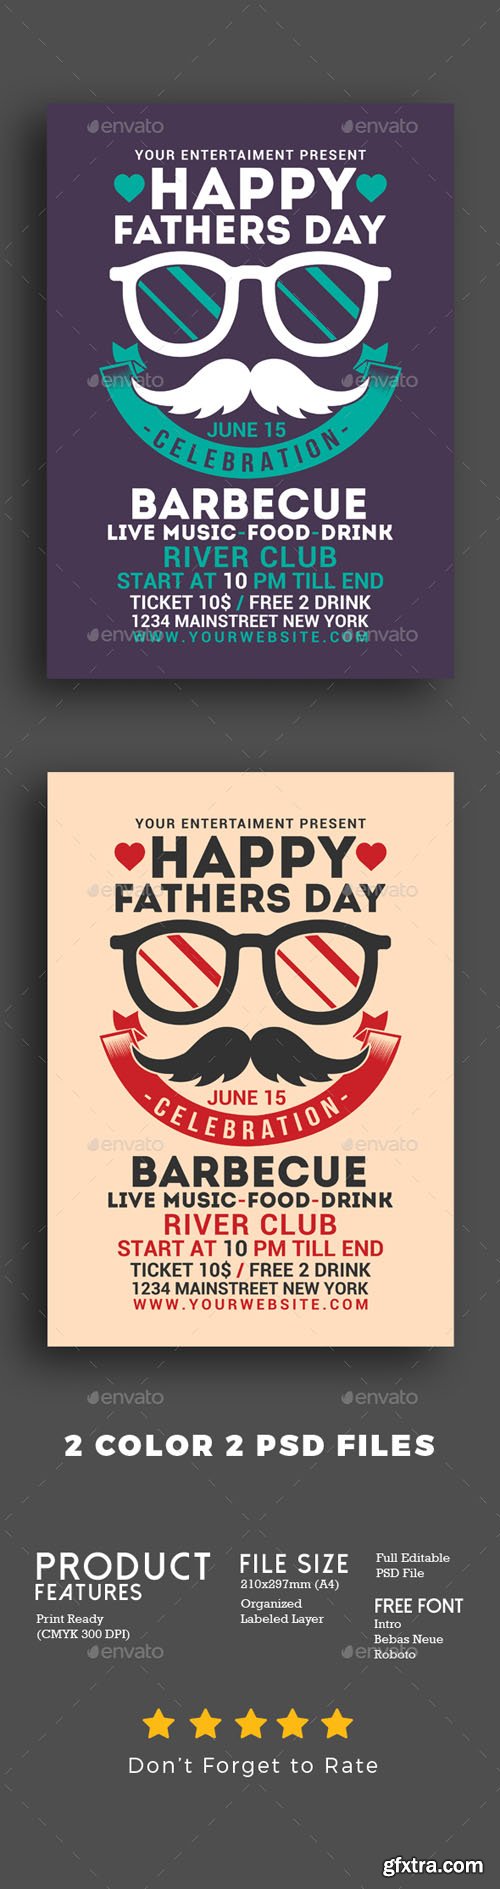 GR - Fathers Day Flyer 20003878